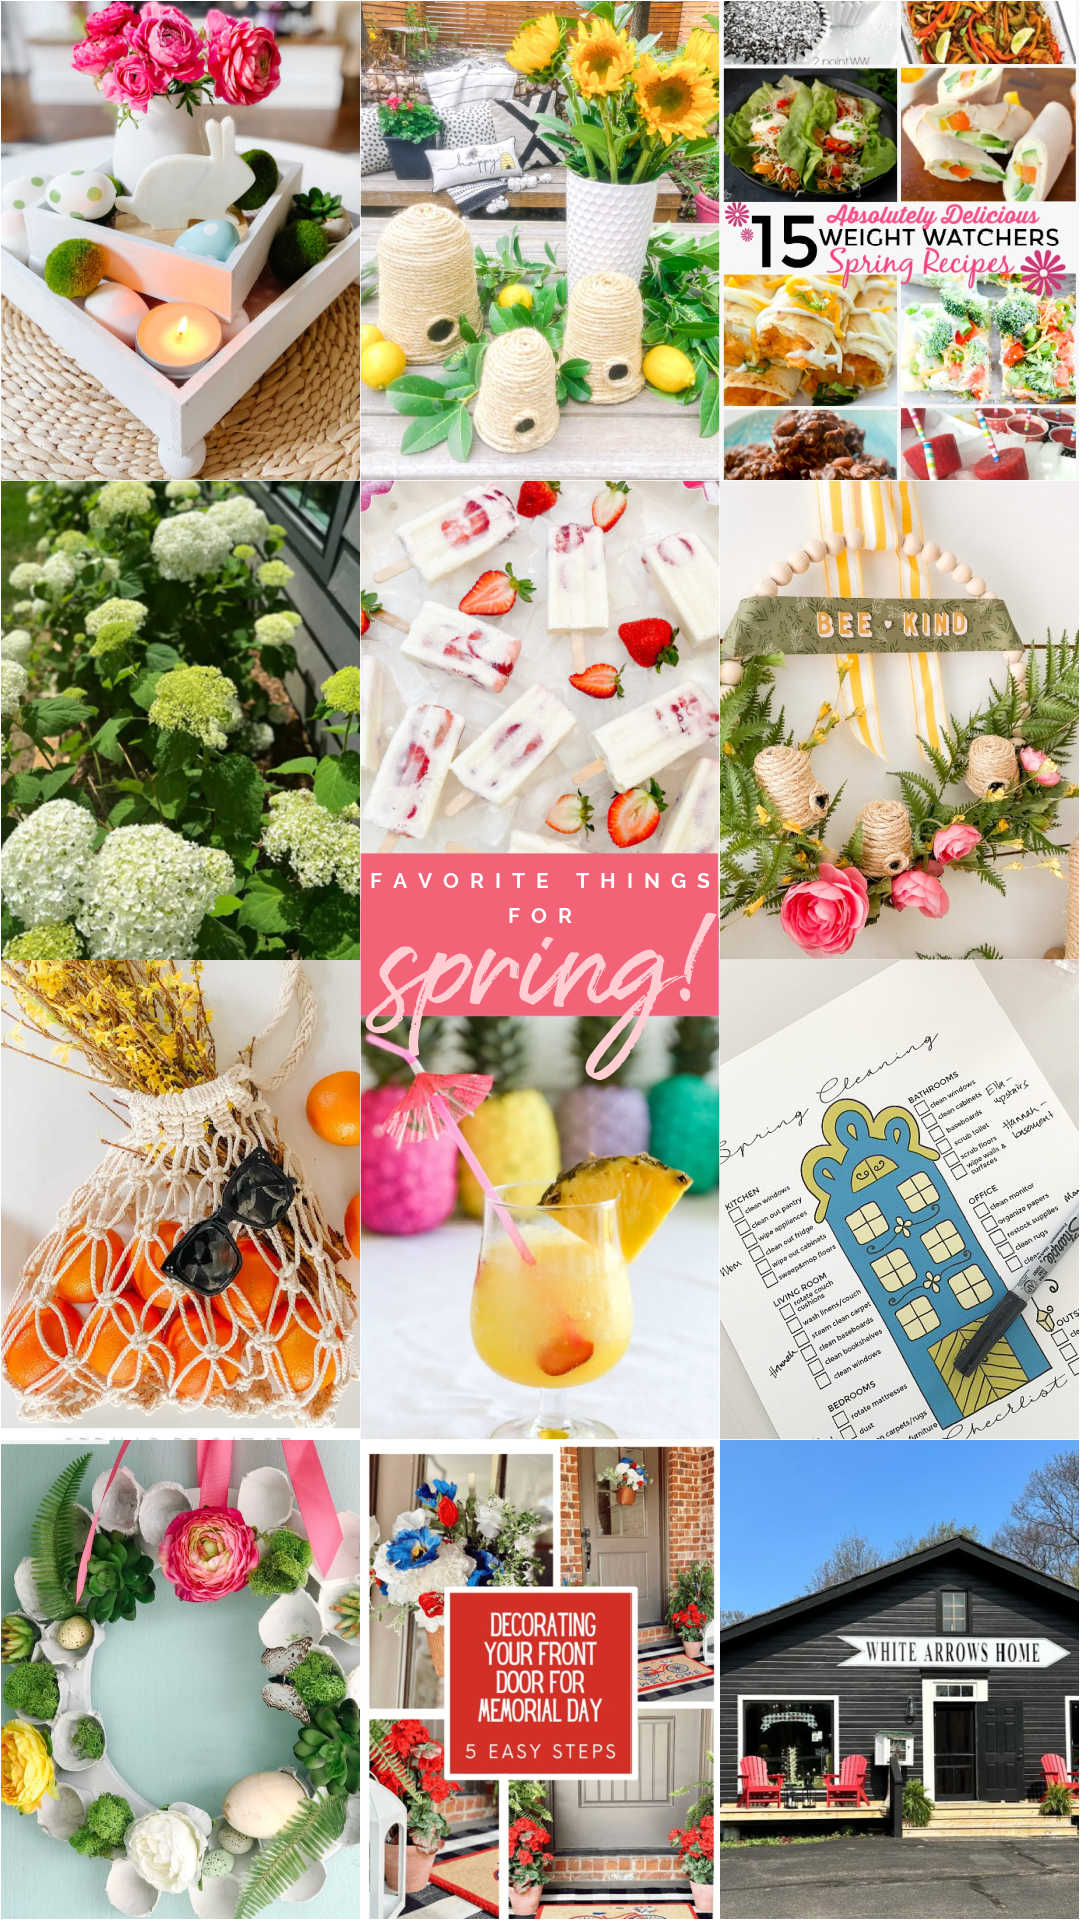 Favorite Things for Spring! The weather is getting warmer, flowers are blooming and here are some ways to make this Spring the best one yet!